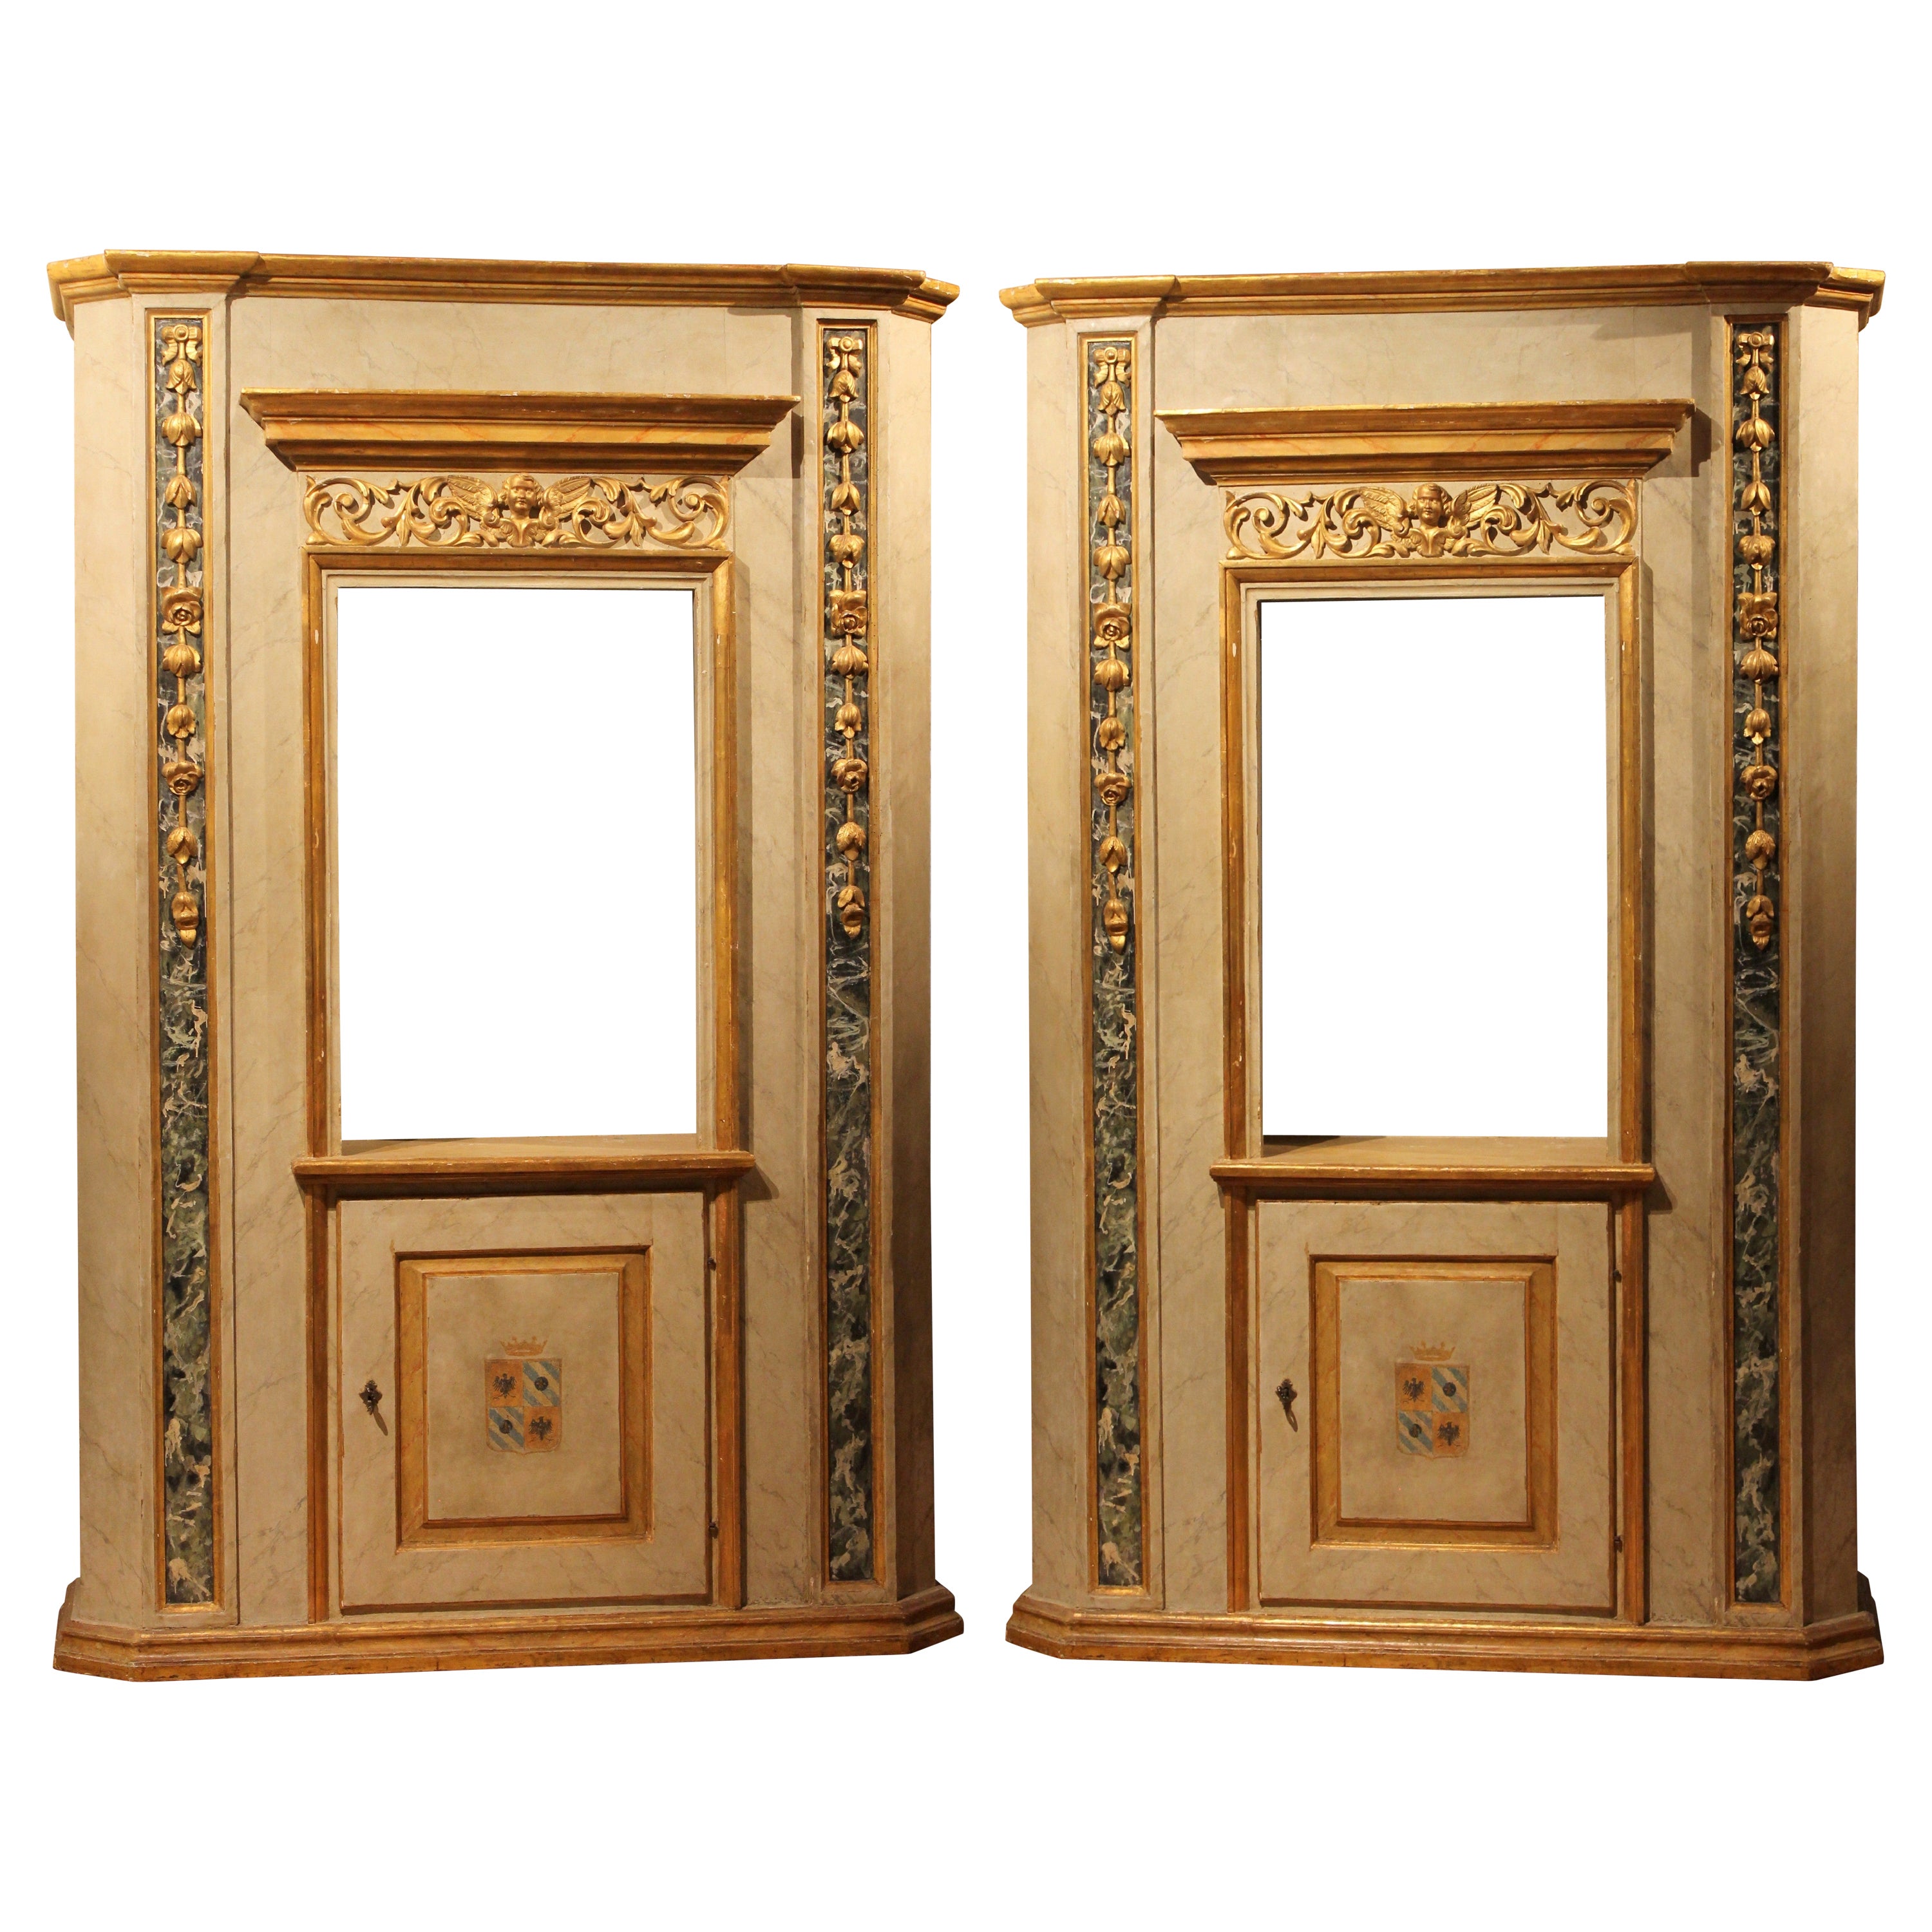 Italian Neoclassical Faux Marble Lacquer and Giltwood Open Shelves Cabinets